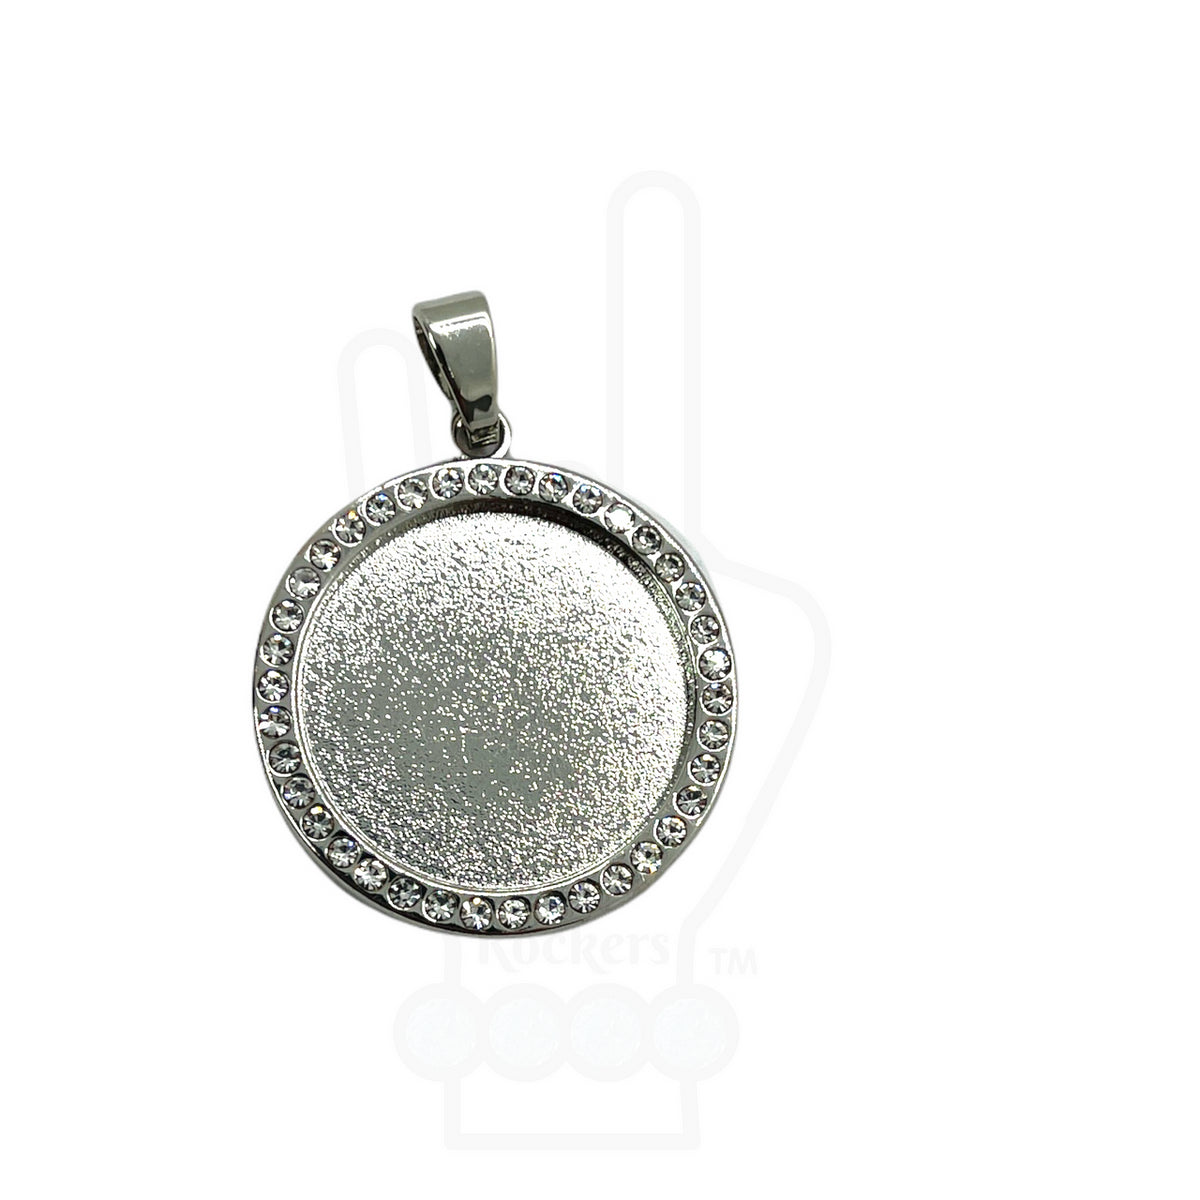 20mm Round Bezel with Rhinestones &amp; Pinch Clips Pendant Blank for UV or Epoxy Resin